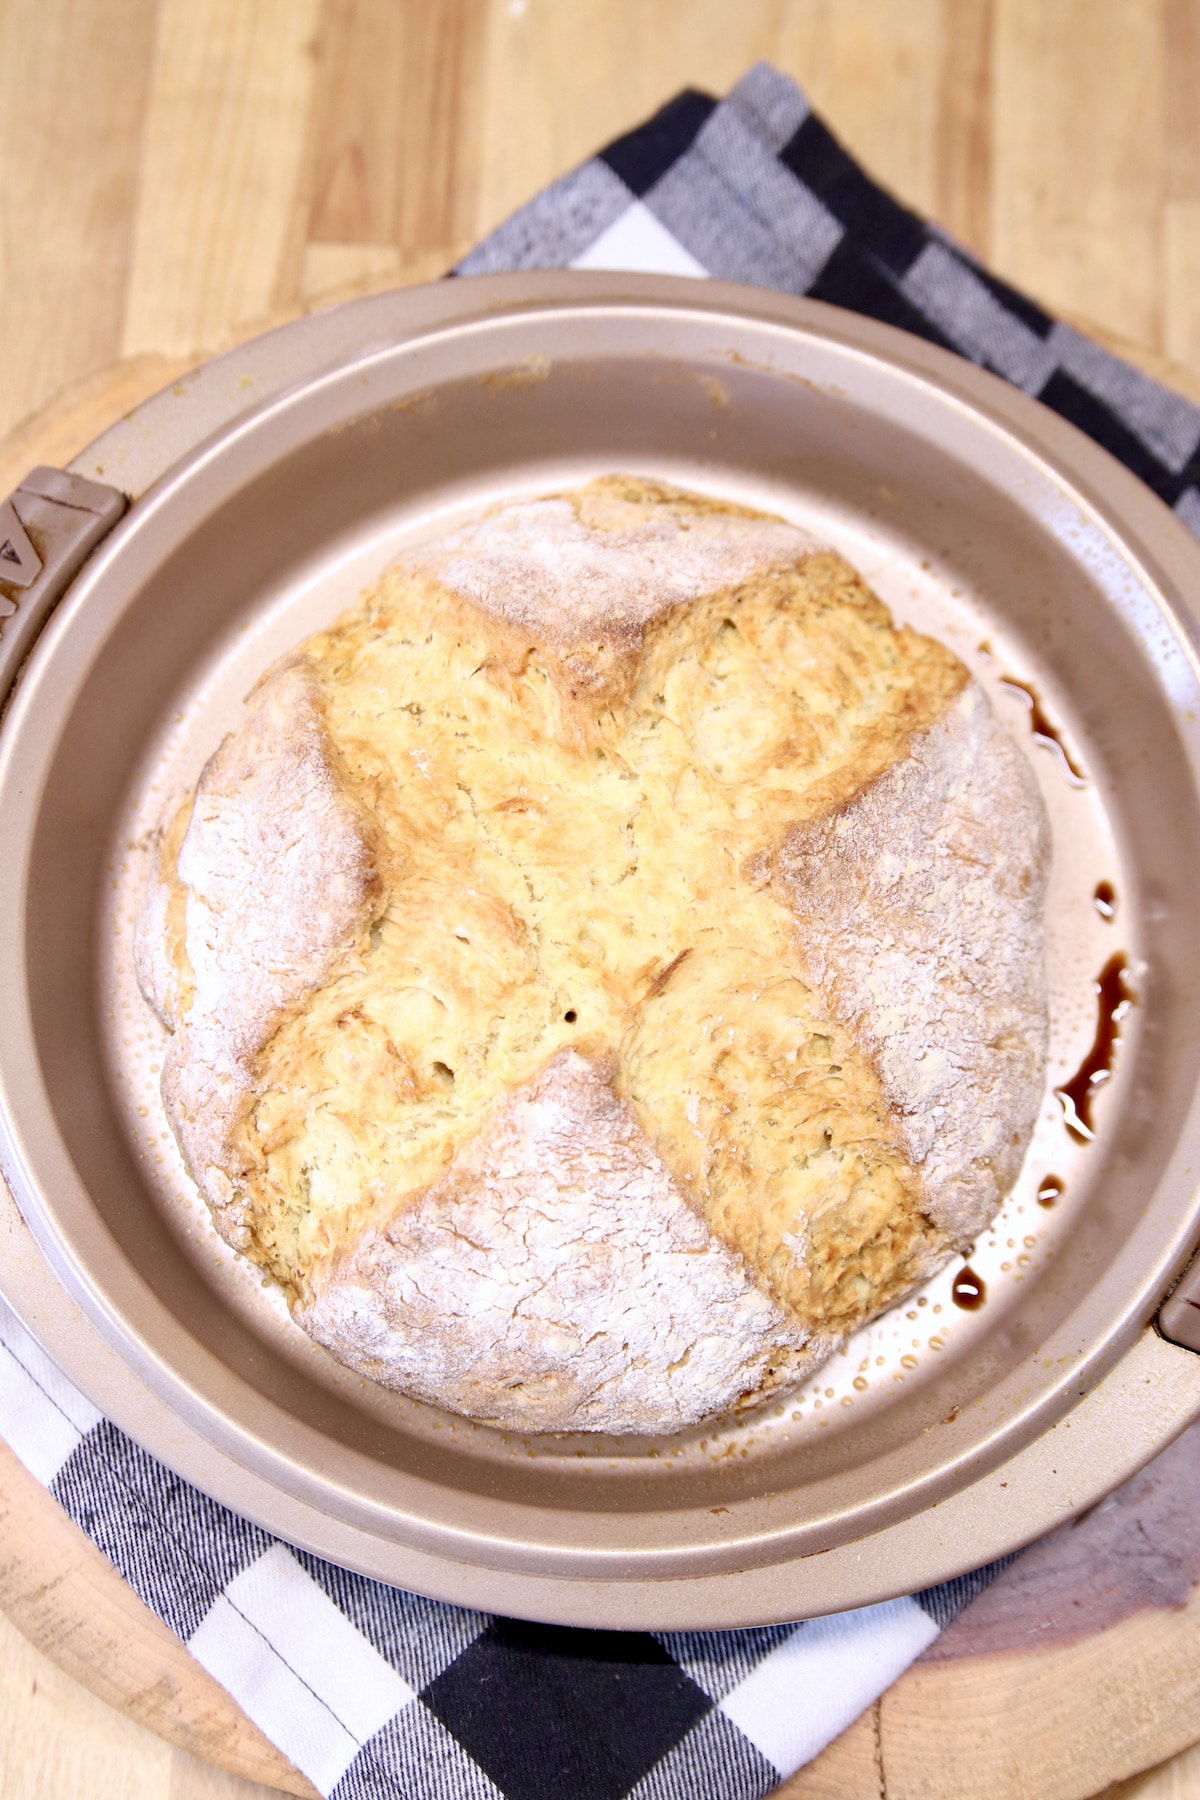 Baked soda bread in a round pan.